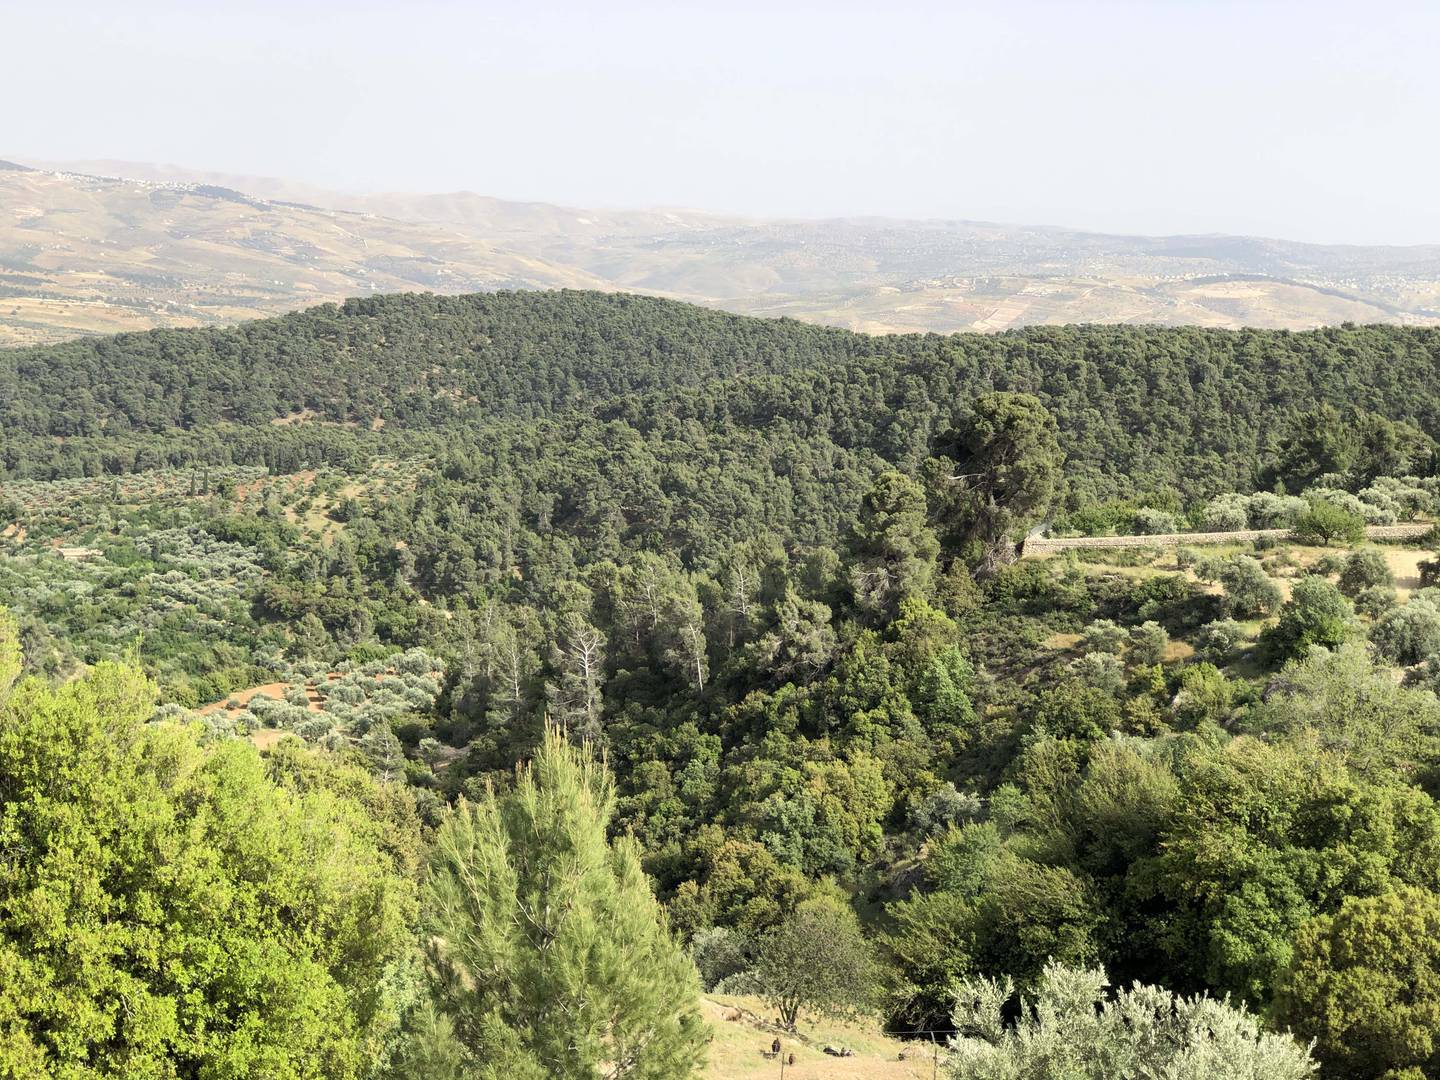 Olive groves and the forest in the village of Dibbeen, around 50 kilometres northwest of Amman. Khaled Yacoub Oweis / The National